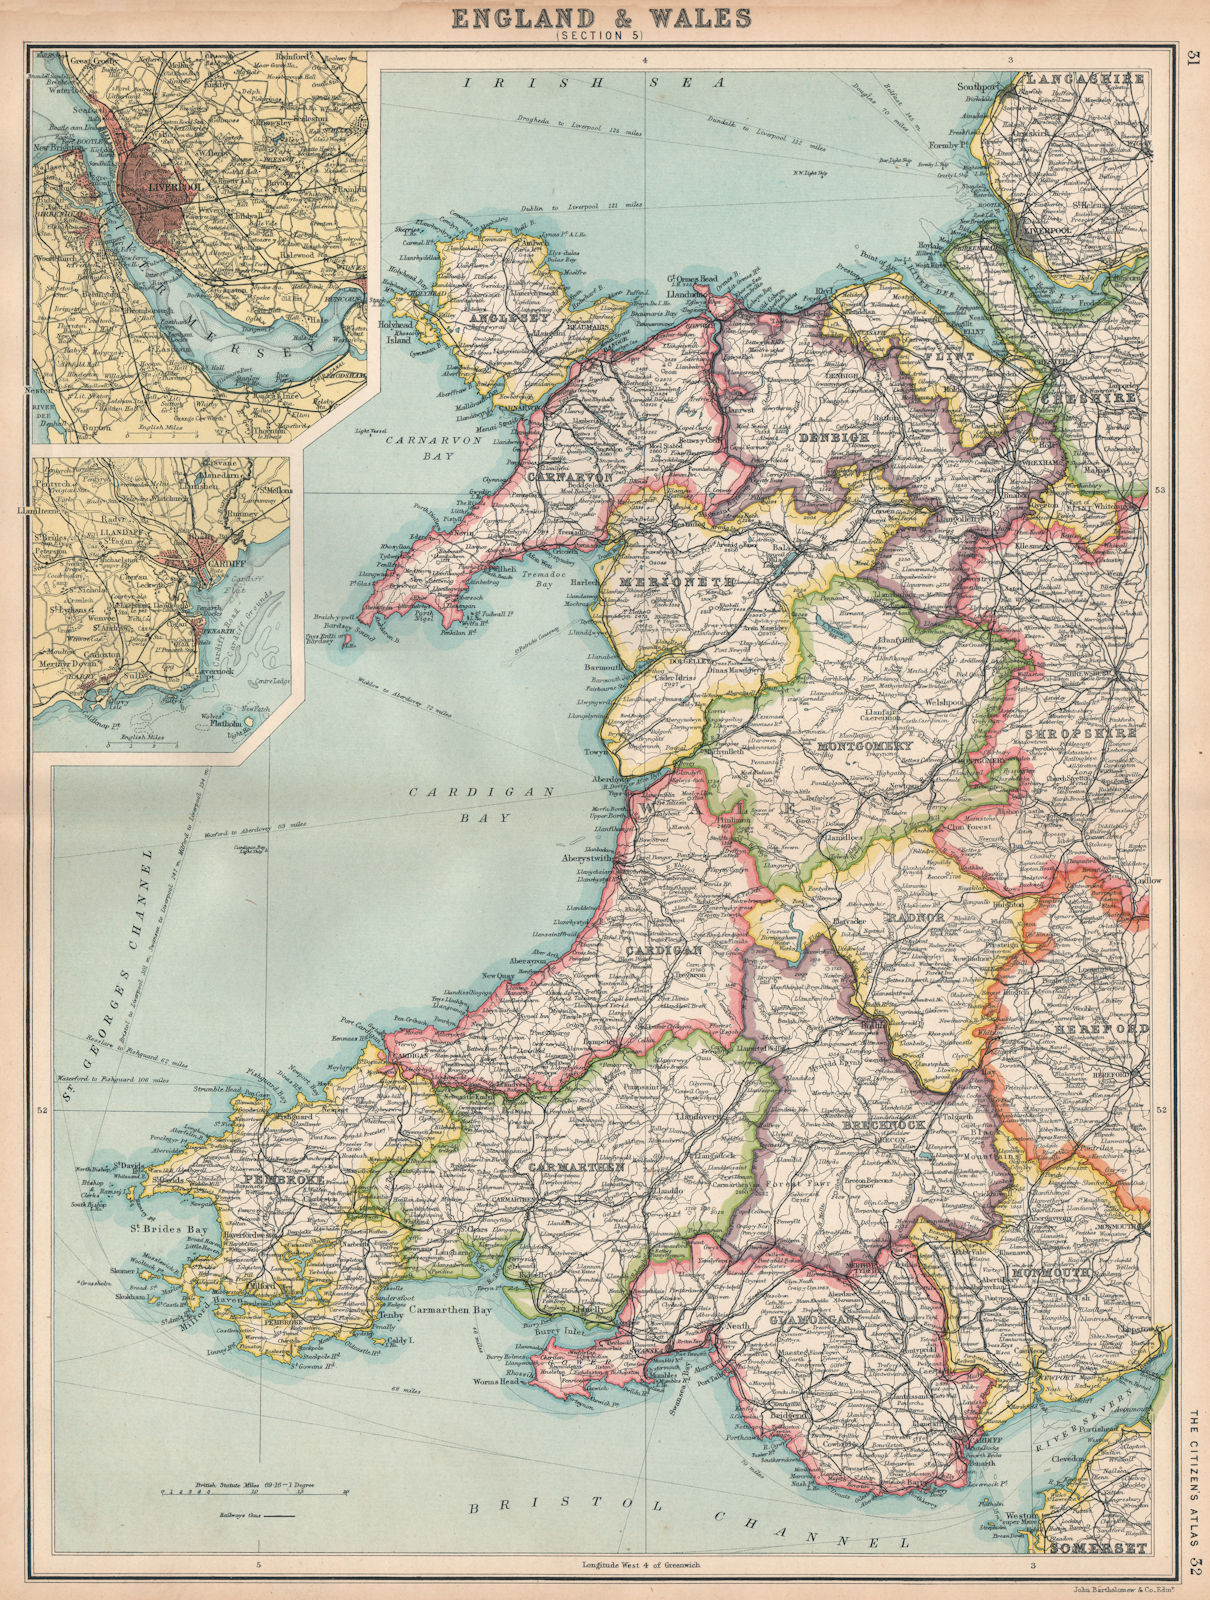 Associate Product WALES.Showing counties & railways.Inset Liverpool & Cardiff.BARTHOLOMEW 1912 map